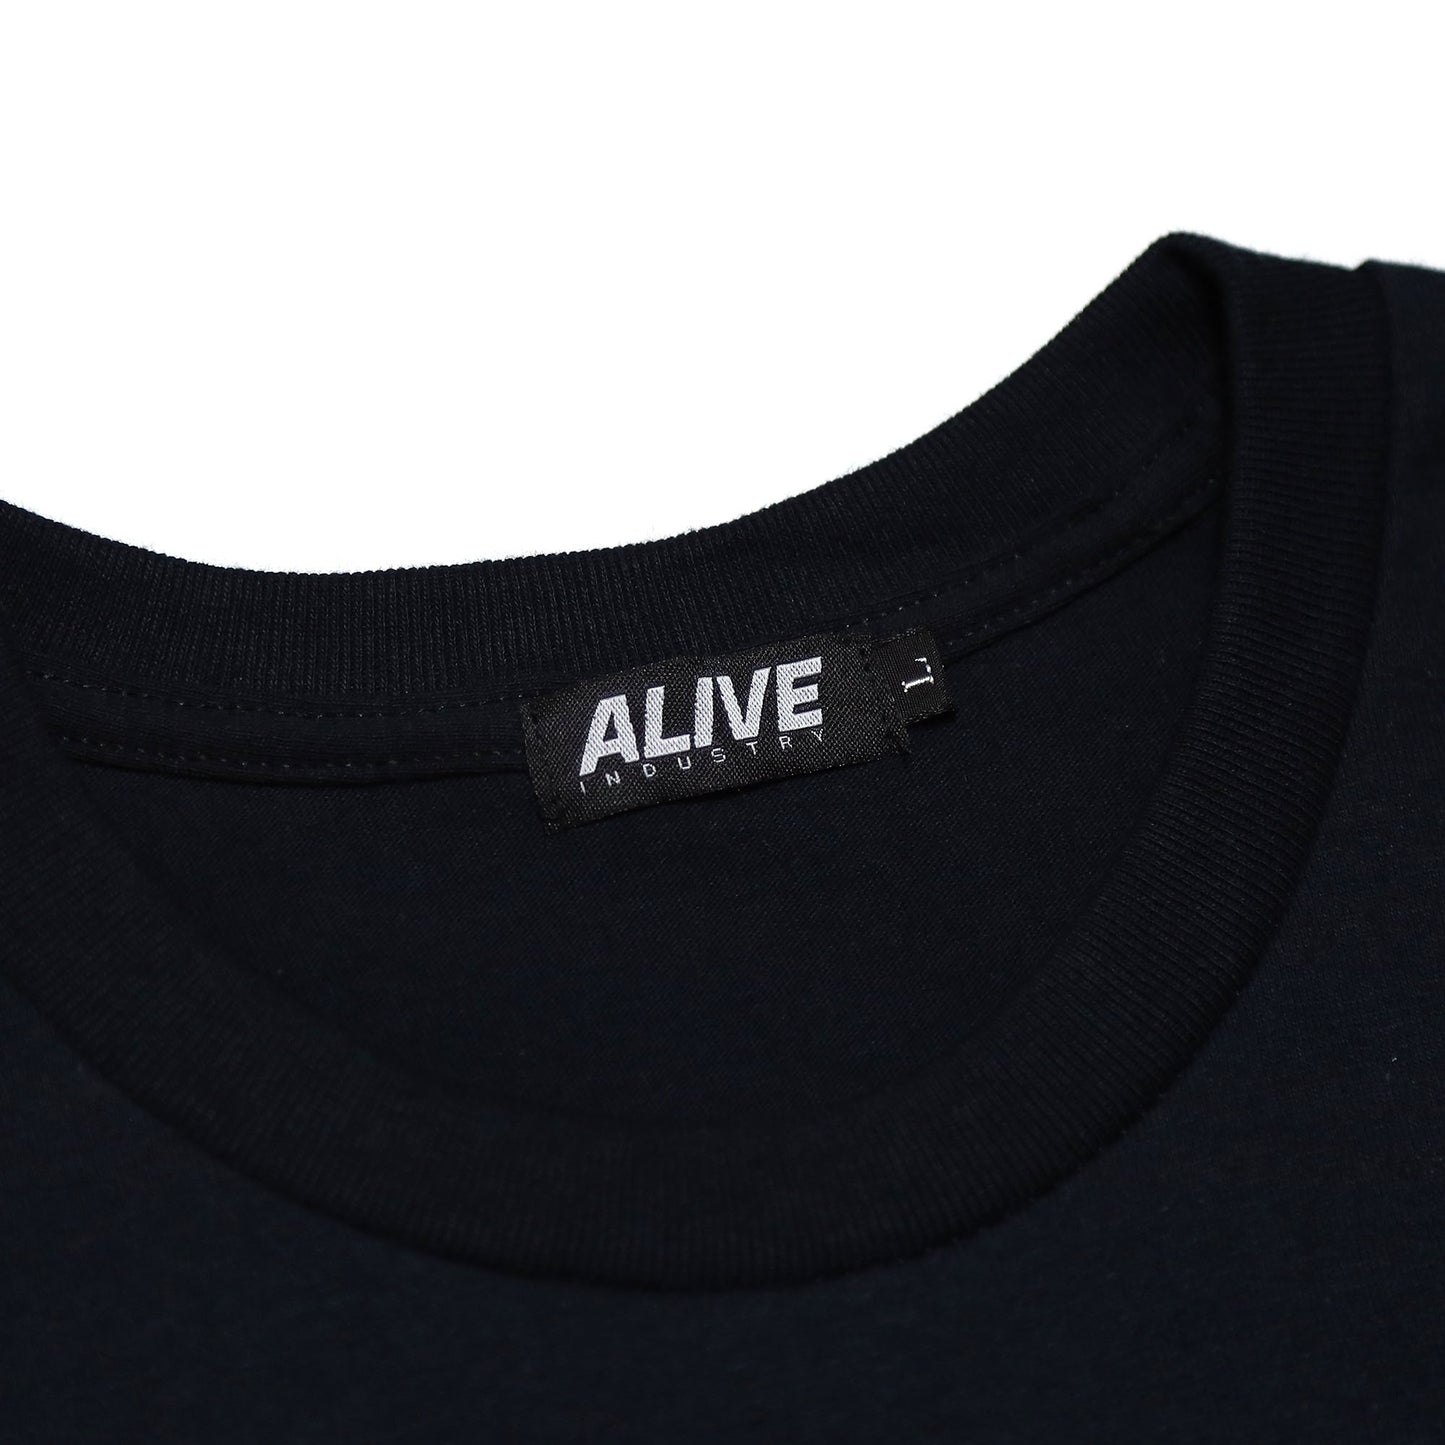 ALIVE INDUSTRY - Throw Up T-Shirt/Black